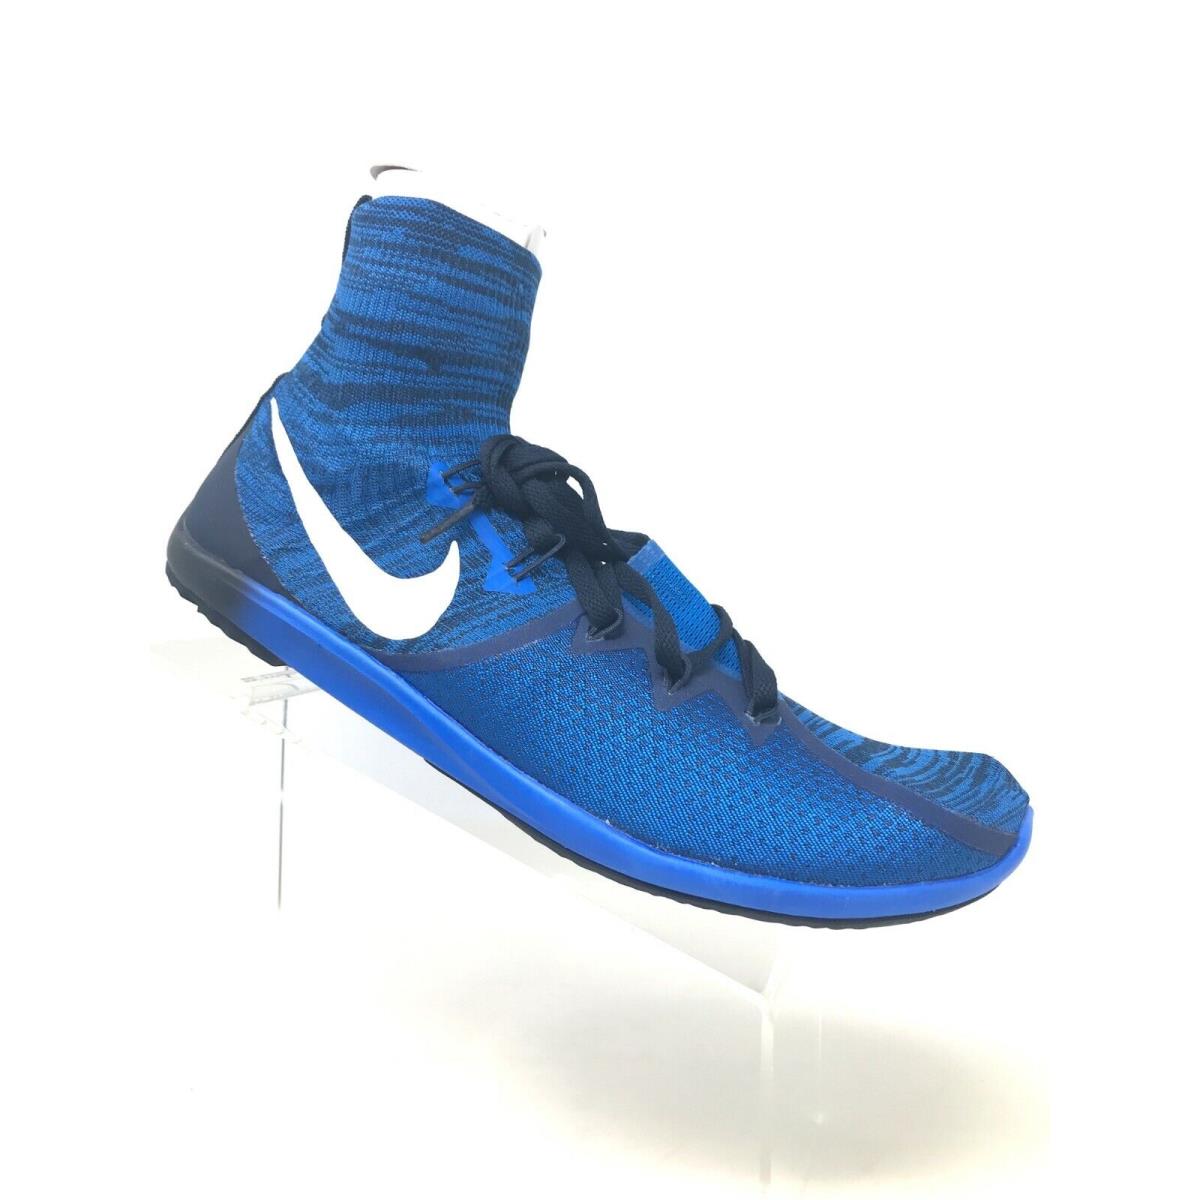 Nike Zoom Victory 4 XC Blue Spike Flyknit Cross Country Running Shoes Mens